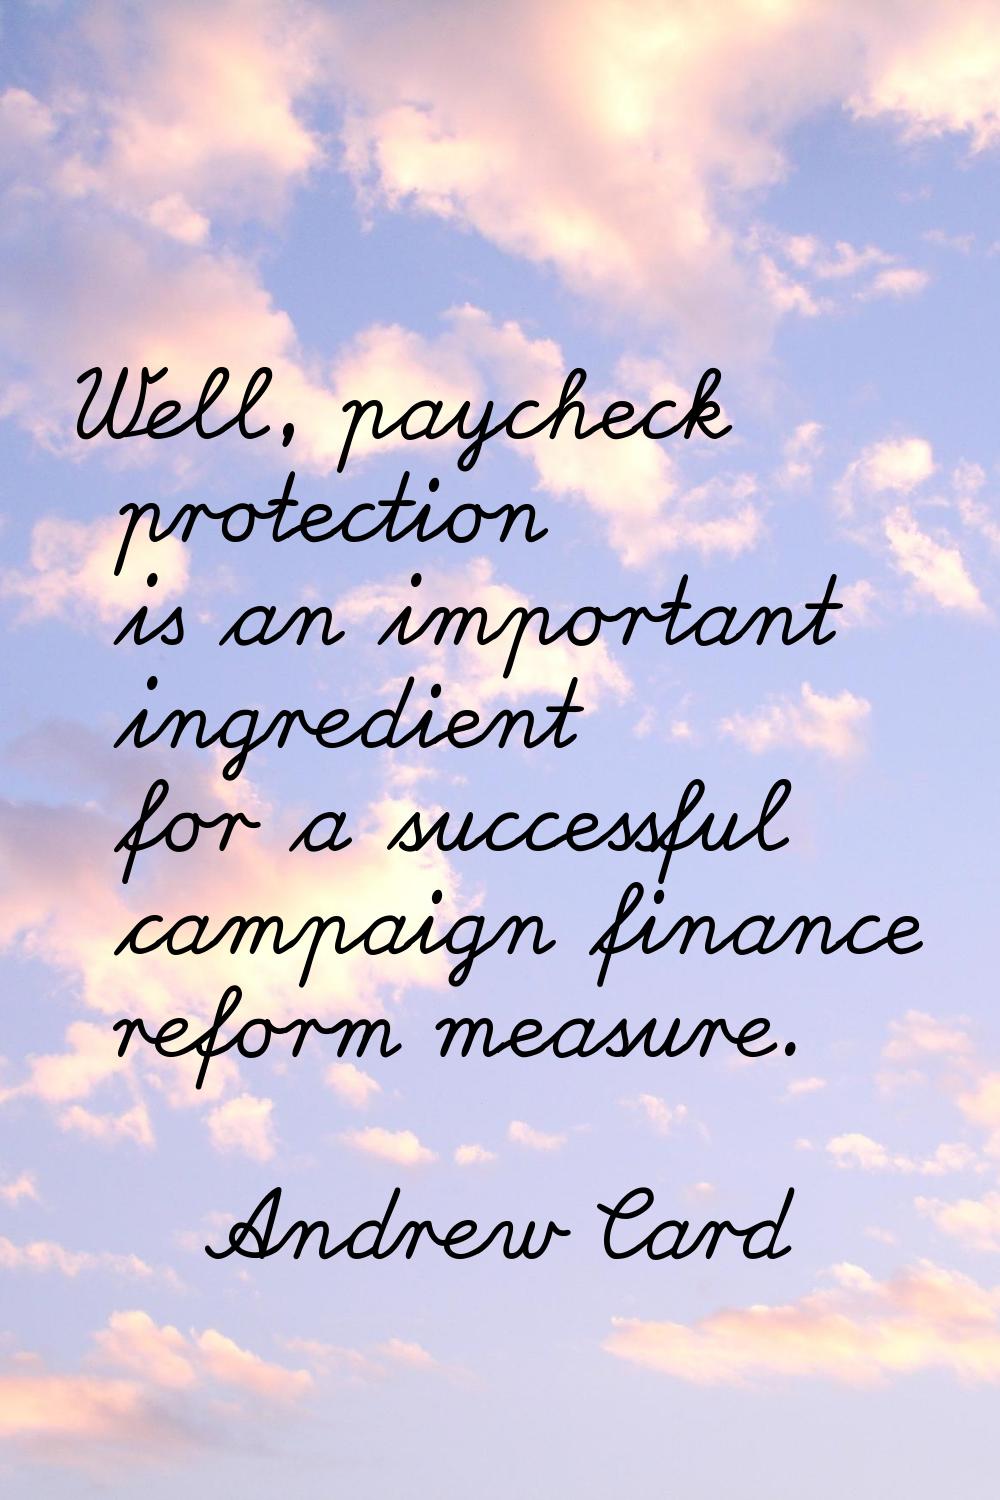 Well, paycheck protection is an important ingredient for a successful campaign finance reform measu